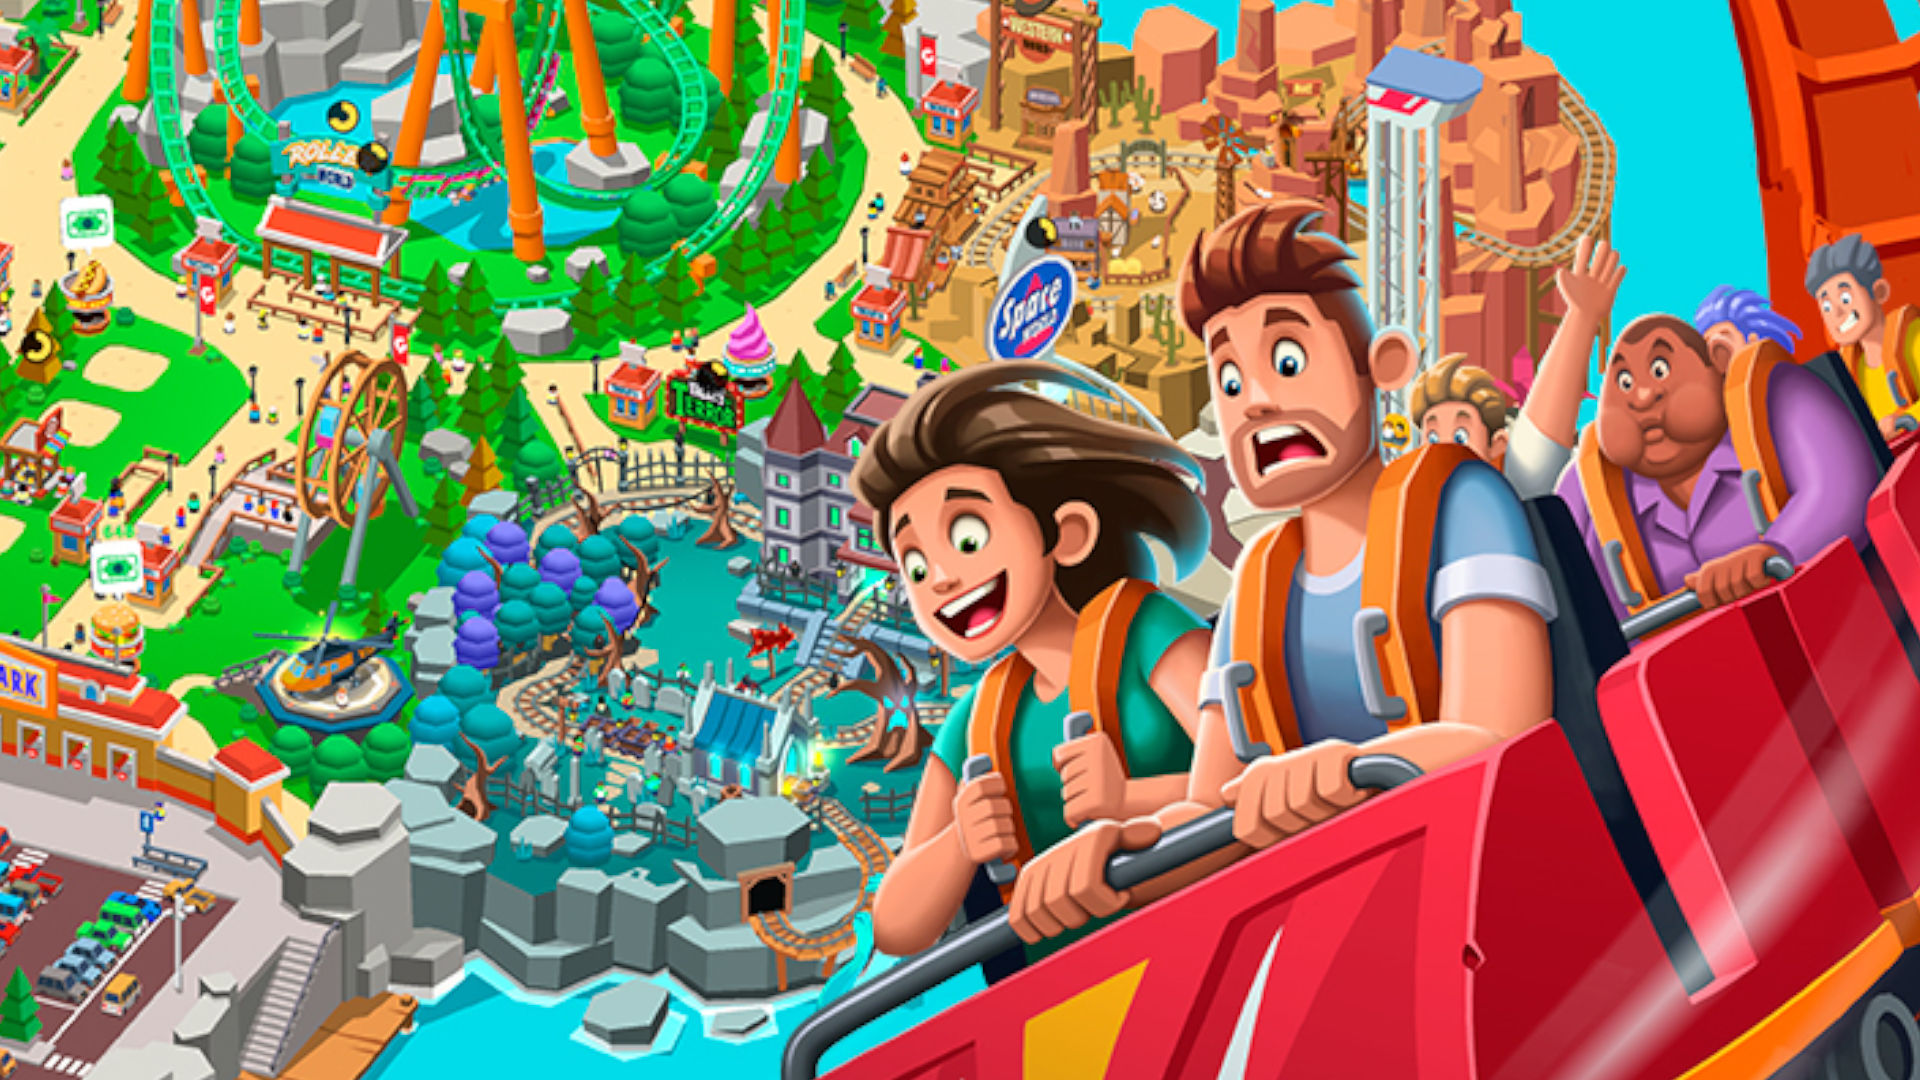 RCT Touch – Six Flags Season 2! - RollerCoaster Tycoon - The Ultimate Theme  park Sim